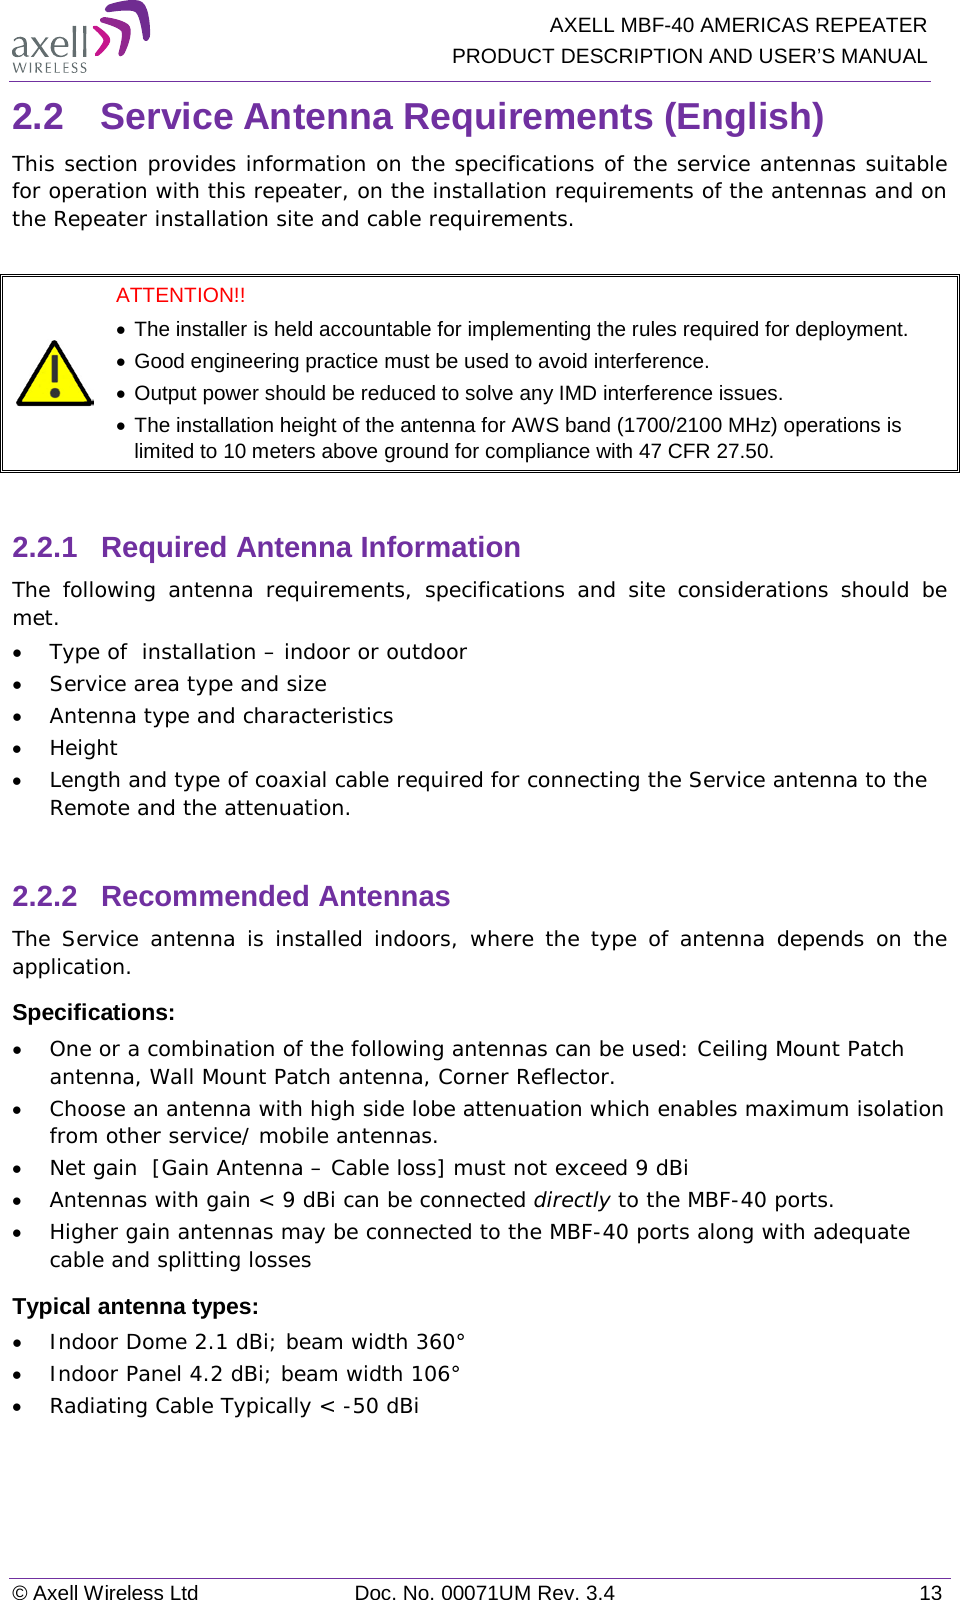   AXELL MBF-40 AMERICAS REPEATER PRODUCT DESCRIPTION AND USER’S MANUAL © Axell Wireless Ltd Doc. No. 00071UM Rev. 3.4 13 2.2  Service Antenna Requirements (English) This section provides information on the specifications of the service antennas suitable for operation with this repeater, on the installation requirements of the antennas and on the Repeater installation site and cable requirements.   ATTENTION!!  • The installer is held accountable for implementing the rules required for deployment.  • Good engineering practice must be used to avoid interference. • Output power should be reduced to solve any IMD interference issues. • The installation height of the antenna for AWS band (1700/2100 MHz) operations is limited to 10 meters above ground for compliance with 47 CFR 27.50.  2.2.1  Required Antenna Information  The following antenna requirements, specifications and site considerations should be met. • Type of  installation – indoor or outdoor • Service area type and size  • Antenna type and characteristics • Height • Length and type of coaxial cable required for connecting the Service antenna to the Remote and the attenuation.  2.2.2  Recommended Antennas  The Service antenna is installed indoors, where the type of antenna depends on the application. Specifications: • One or a combination of the following antennas can be used: Ceiling Mount Patch antenna, Wall Mount Patch antenna, Corner Reflector. • Choose an antenna with high side lobe attenuation which enables maximum isolation from other service/ mobile antennas. • Net gain  [Gain Antenna – Cable loss] must not exceed 9 dBi • Antennas with gain &lt; 9 dBi can be connected directly to the MBF-40 ports. • Higher gain antennas may be connected to the MBF-40 ports along with adequate cable and splitting losses  Typical antenna types: • Indoor Dome 2.1 dBi; beam width 360° • Indoor Panel 4.2 dBi; beam width 106° • Radiating Cable Typically &lt; -50 dBi    